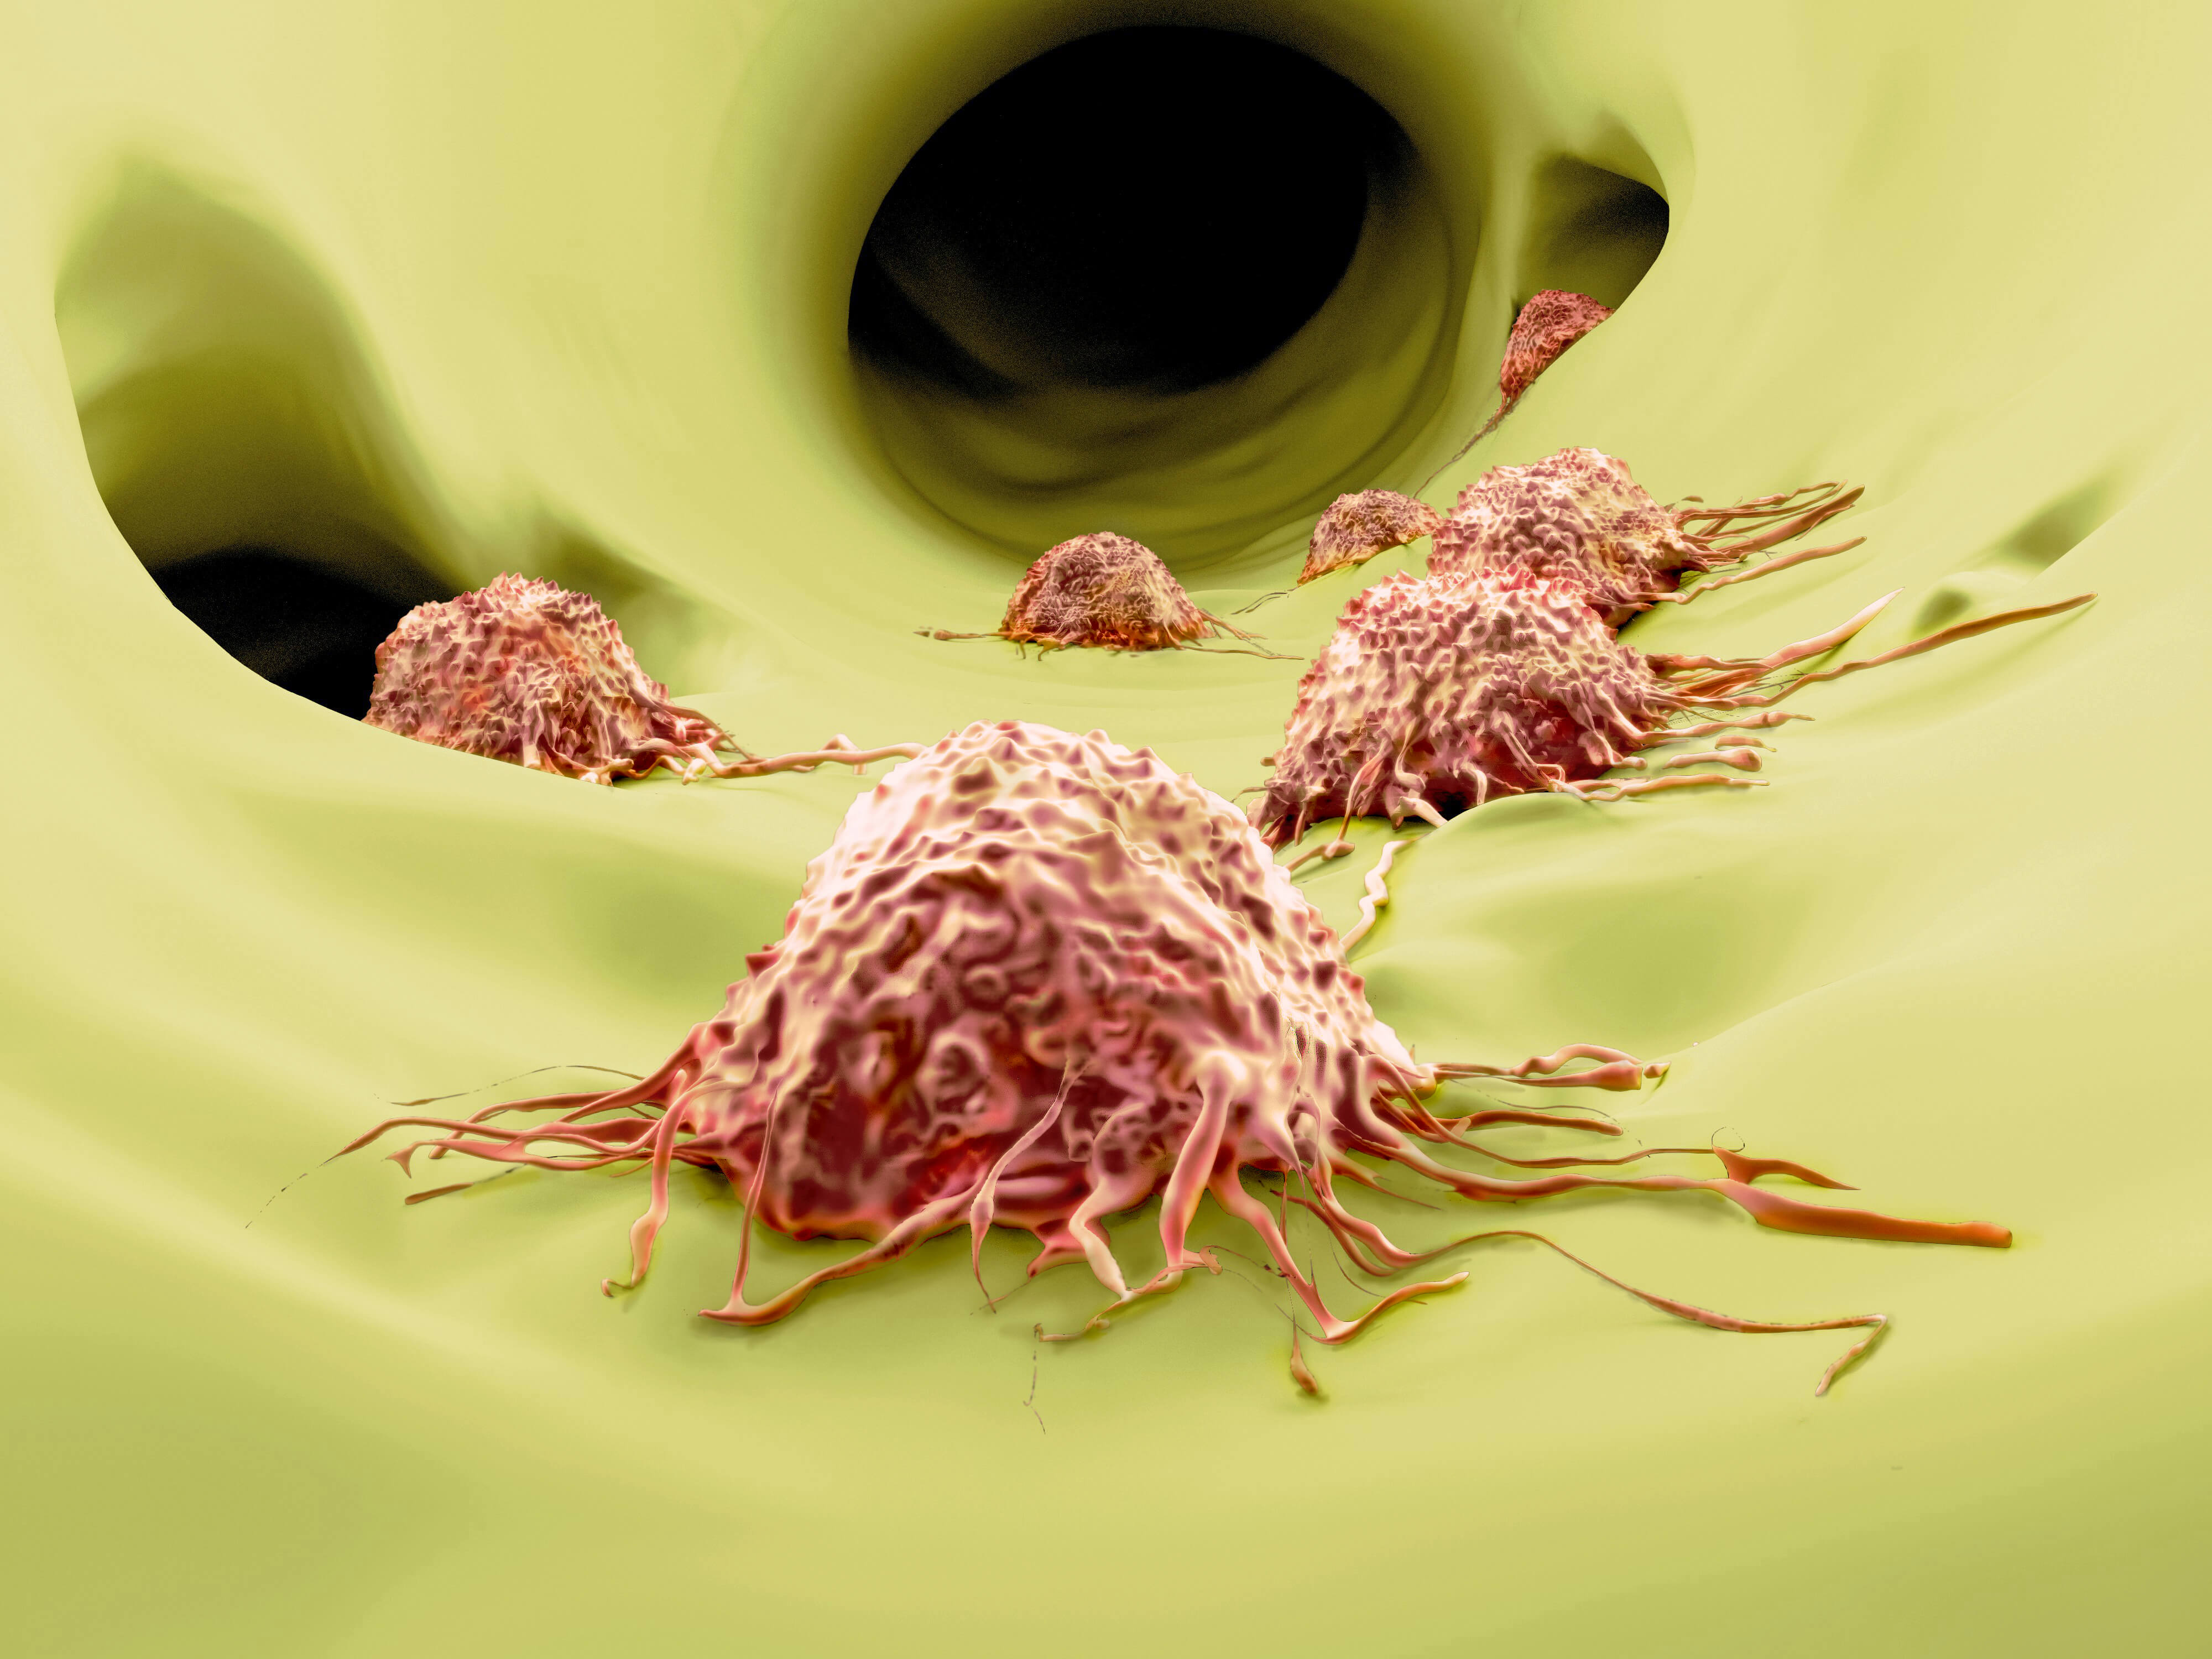 Cancer cells migrate through the body. Photo: shutterstock